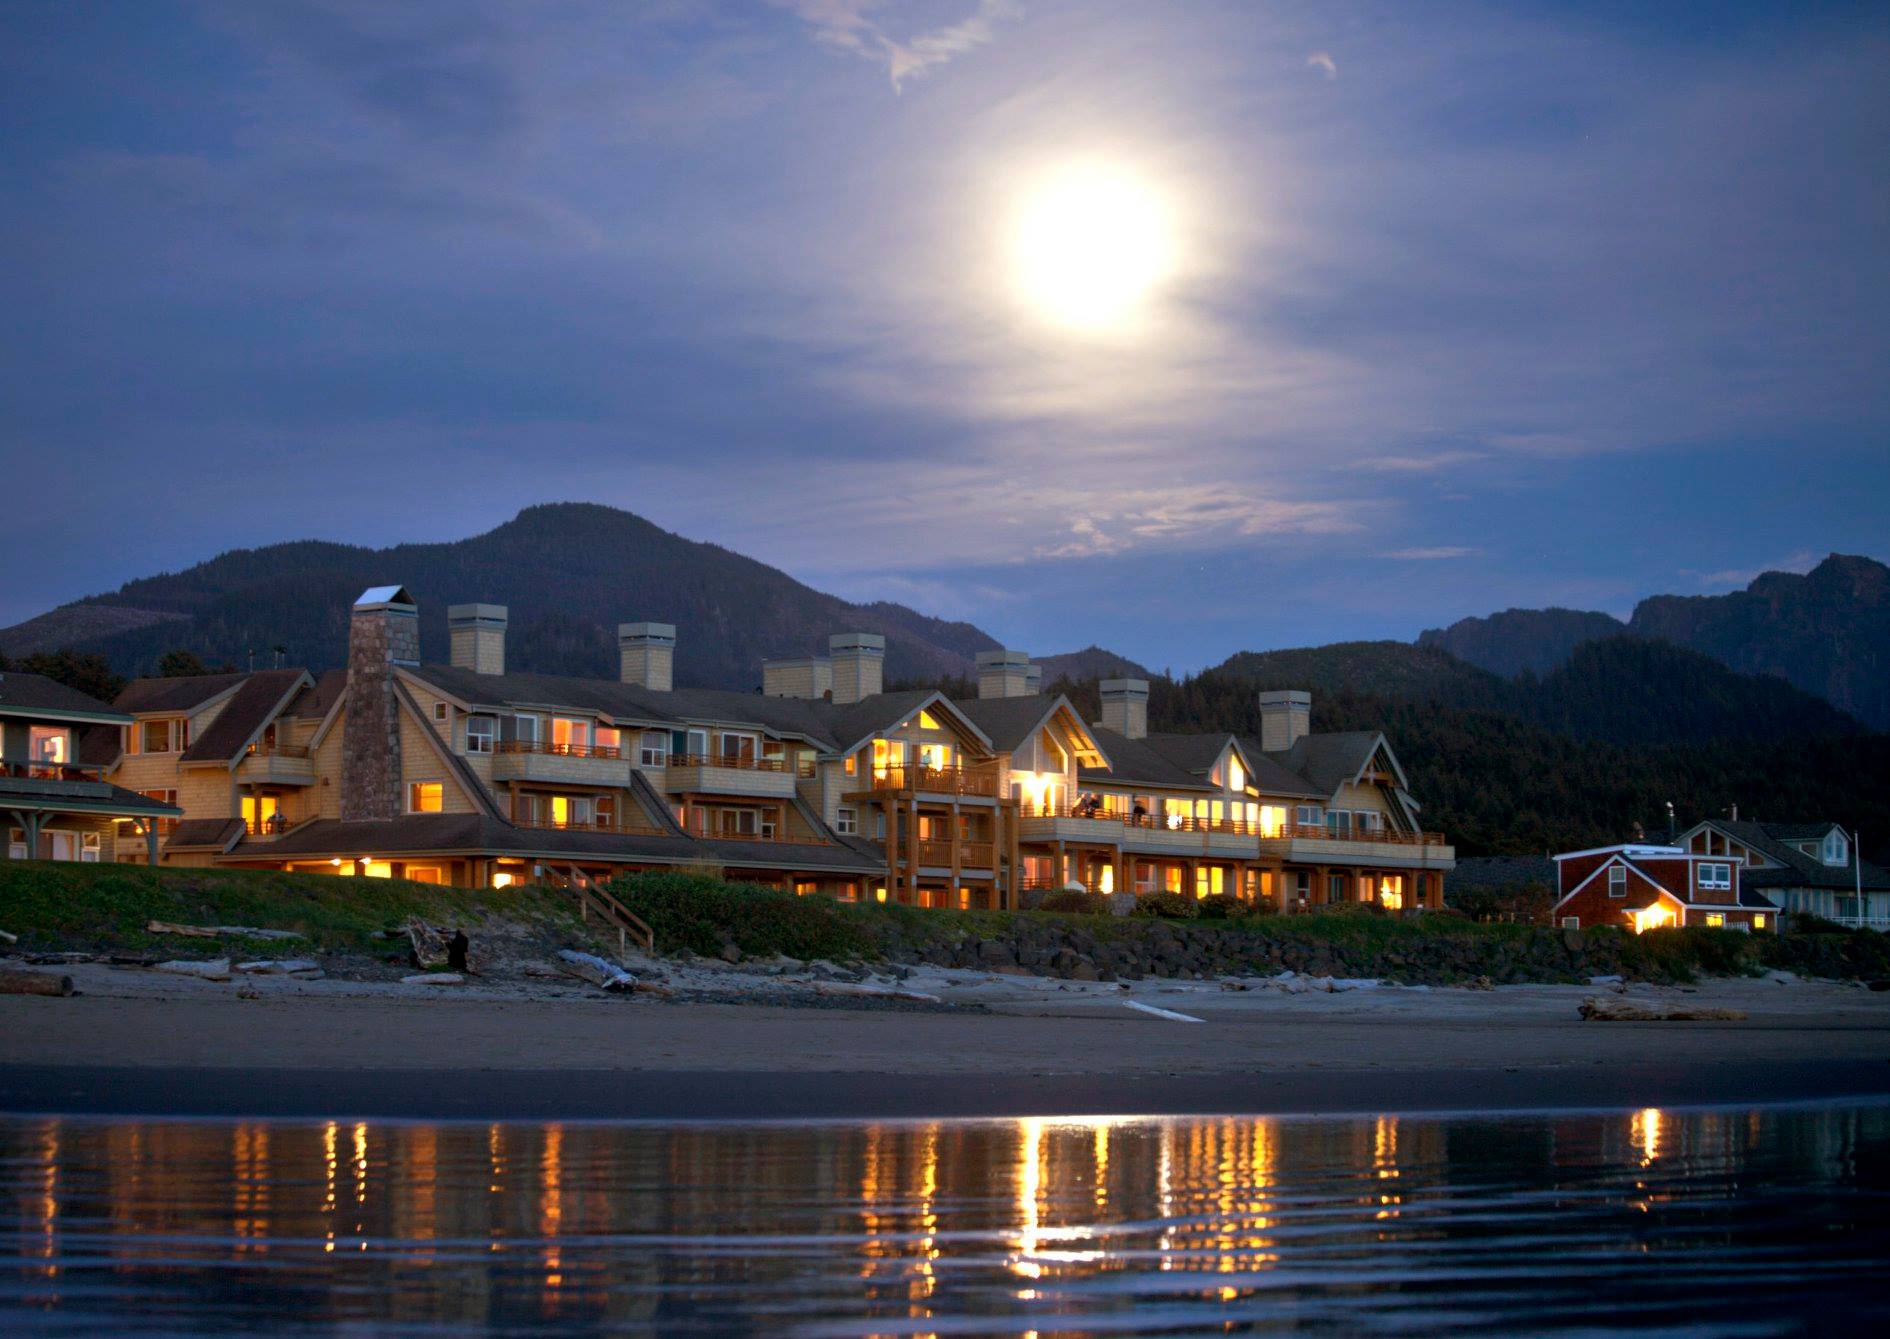 Oregon Has 3 Top Ranking Resorts In U.S. Top 15 – All In Cannon Beach